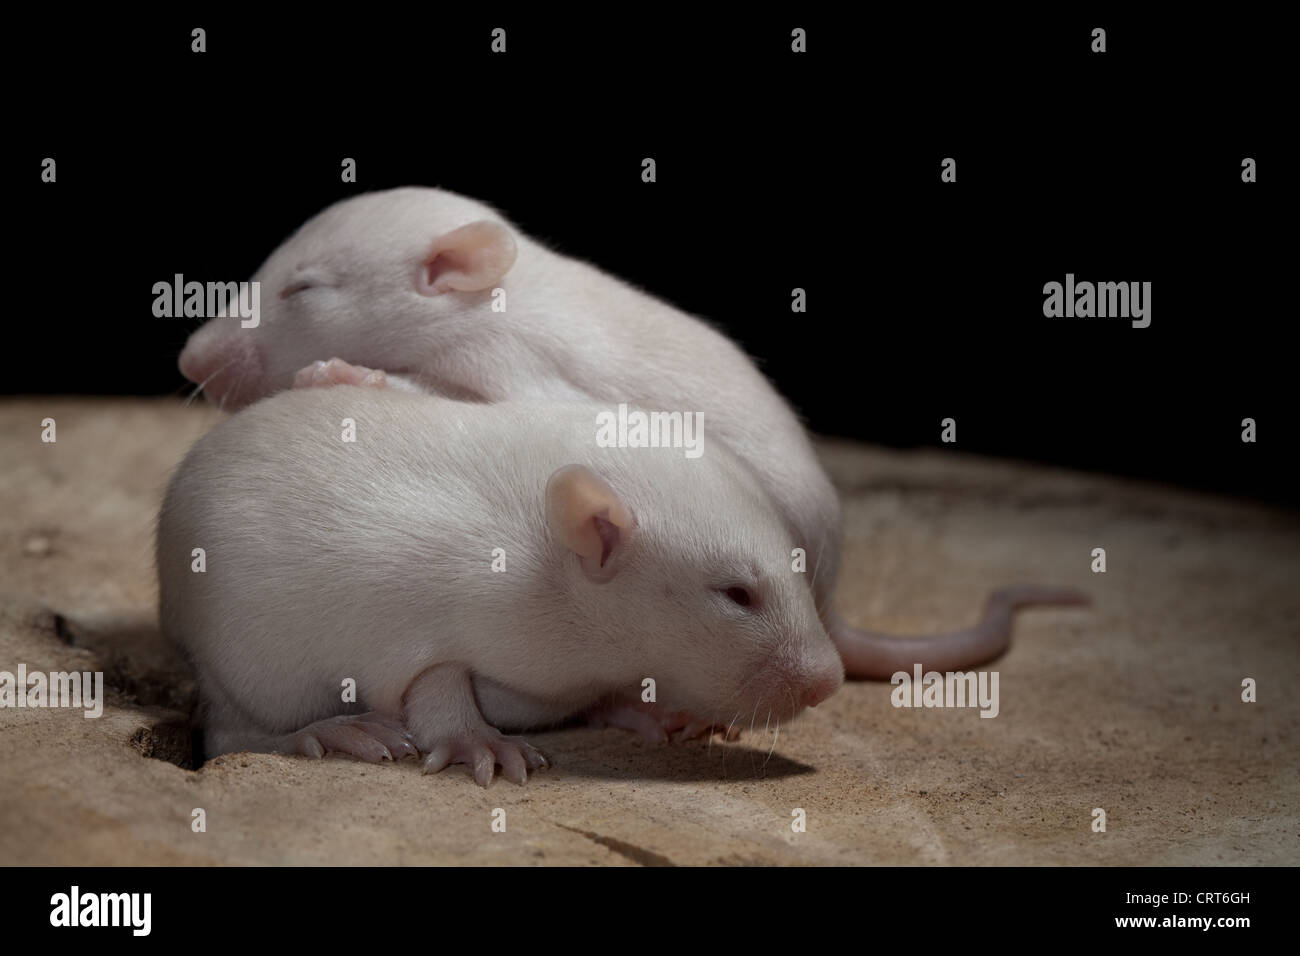 Domesticated Rats (Rattus norvegicus). 13 days old baby, 'pup' rats. Albino, showing pink eyes beginning to open for first time. Stock Photo